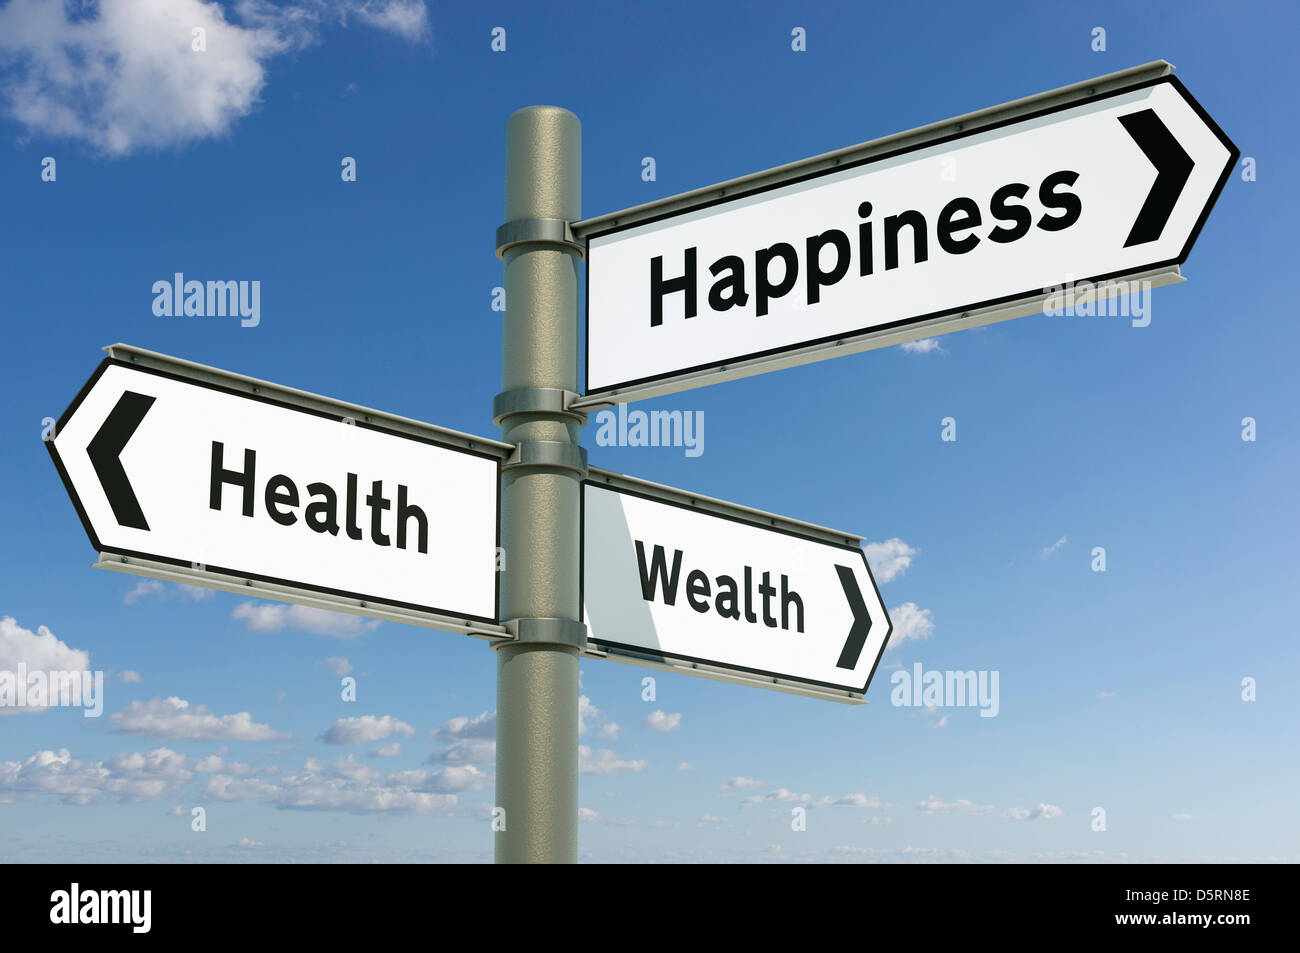 Health, Wealth, Happiness - decisions future direction choice concept Stock Photo